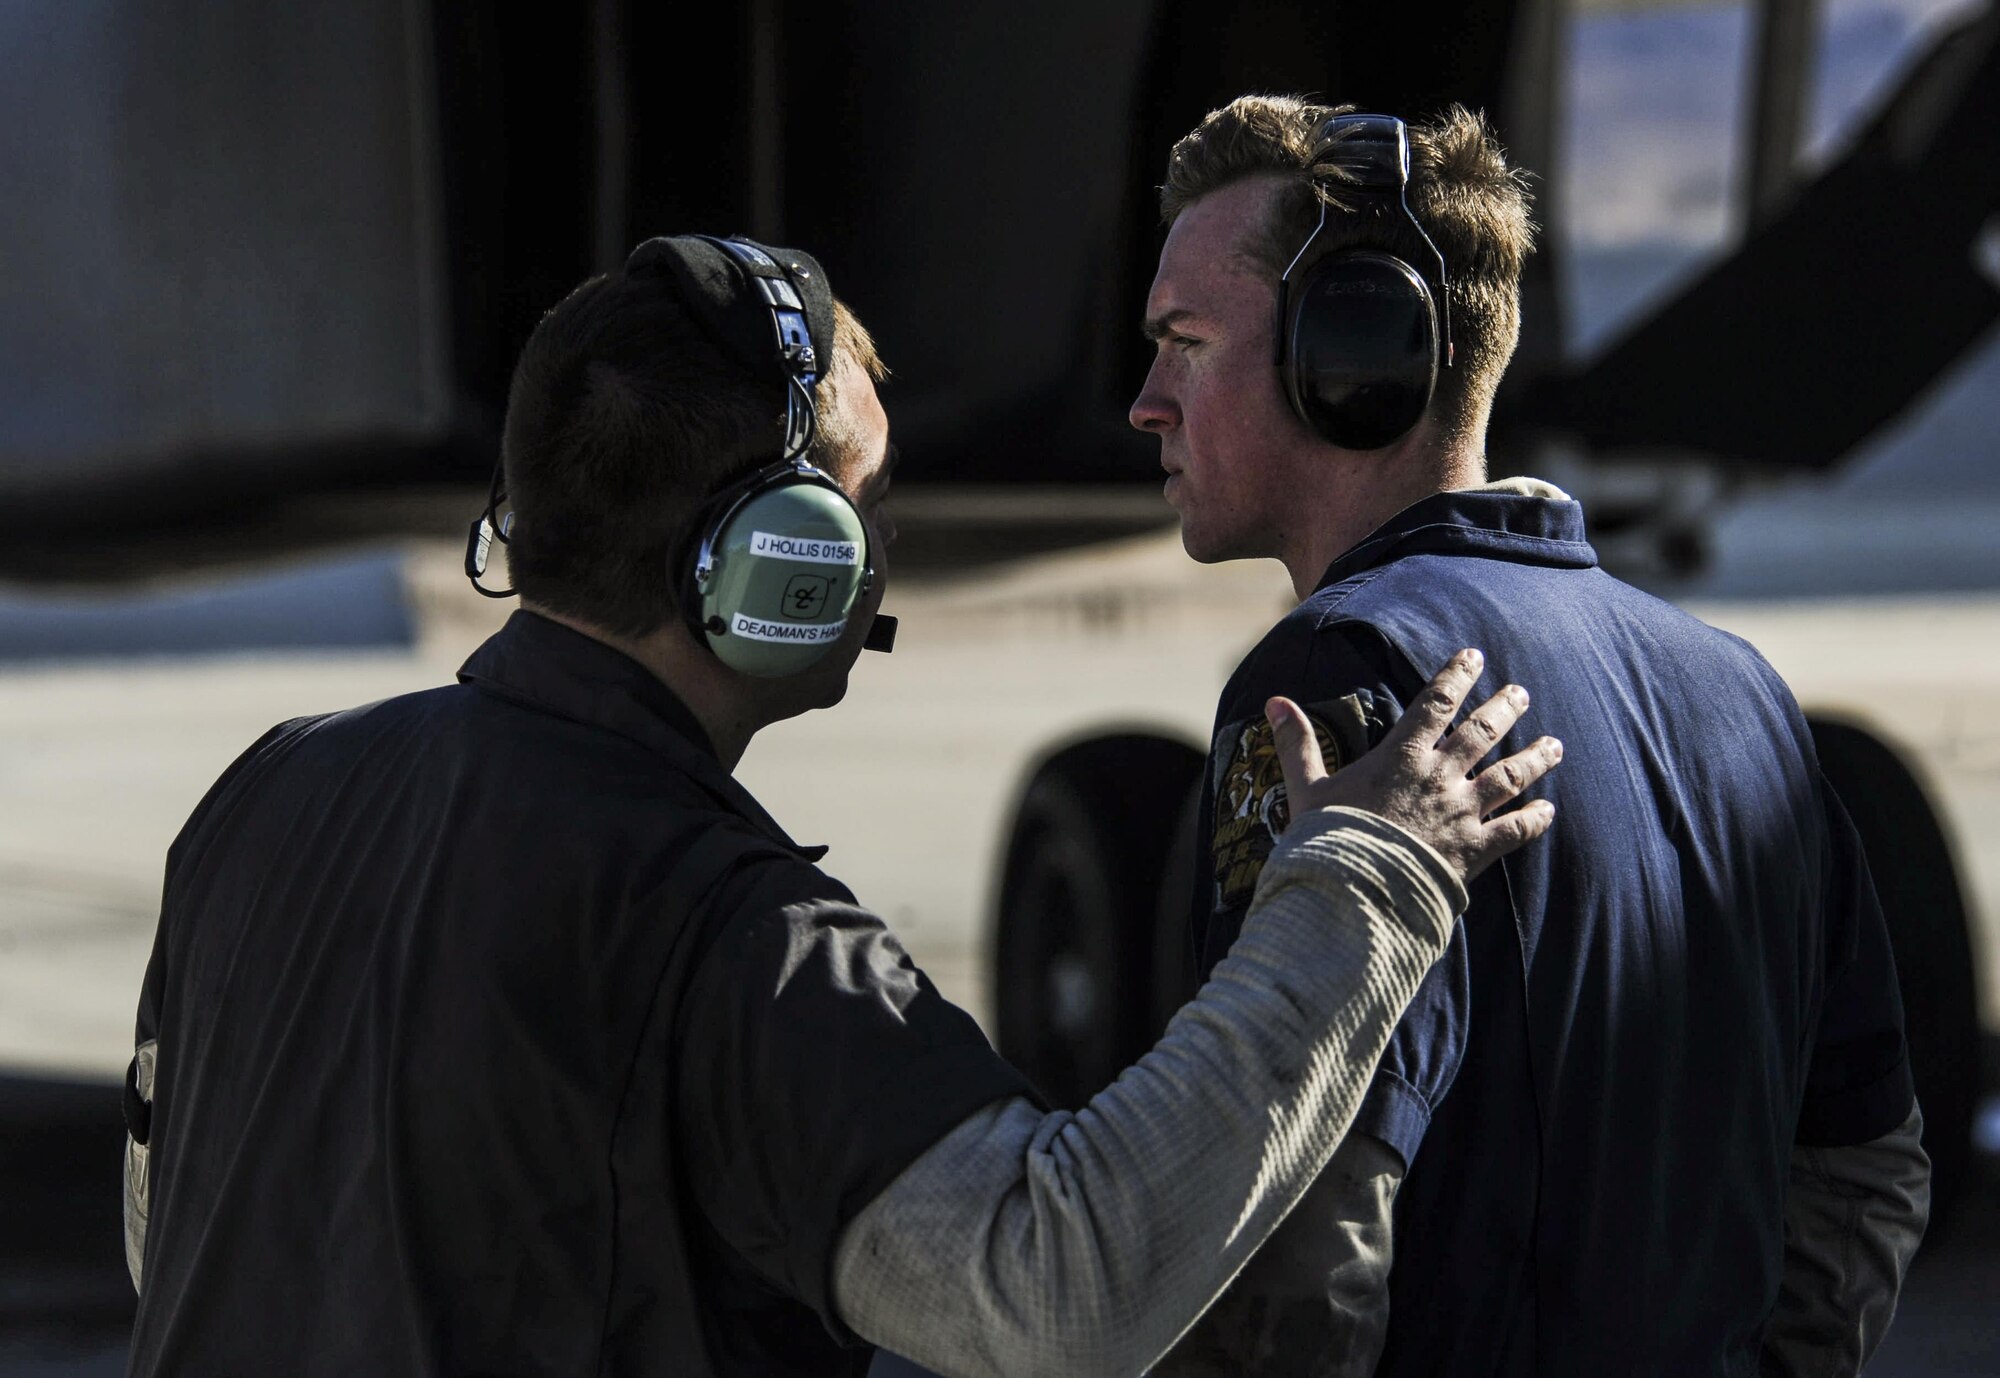 Staff Sgt. Justin Hollis and Senior Airman Jacob Widtmannheiser, crew chiefs assigned to the 28th Aircraft Maintenance Squadron, Ellsworth Air Force Base, S.D., talk as a B-1B Lancer prepares to takeoff during Red Flag 17-1 on Nellis Air Force Base, Nev., Jan. 27, 2017. All four branches of the U.S. military and air forces from allied nations participate in Red Flag in order to familiarize forces that will work together in future operations. (U.S. Air Force photo by Airman 1st Class Kevin Tanenbaum/Released)